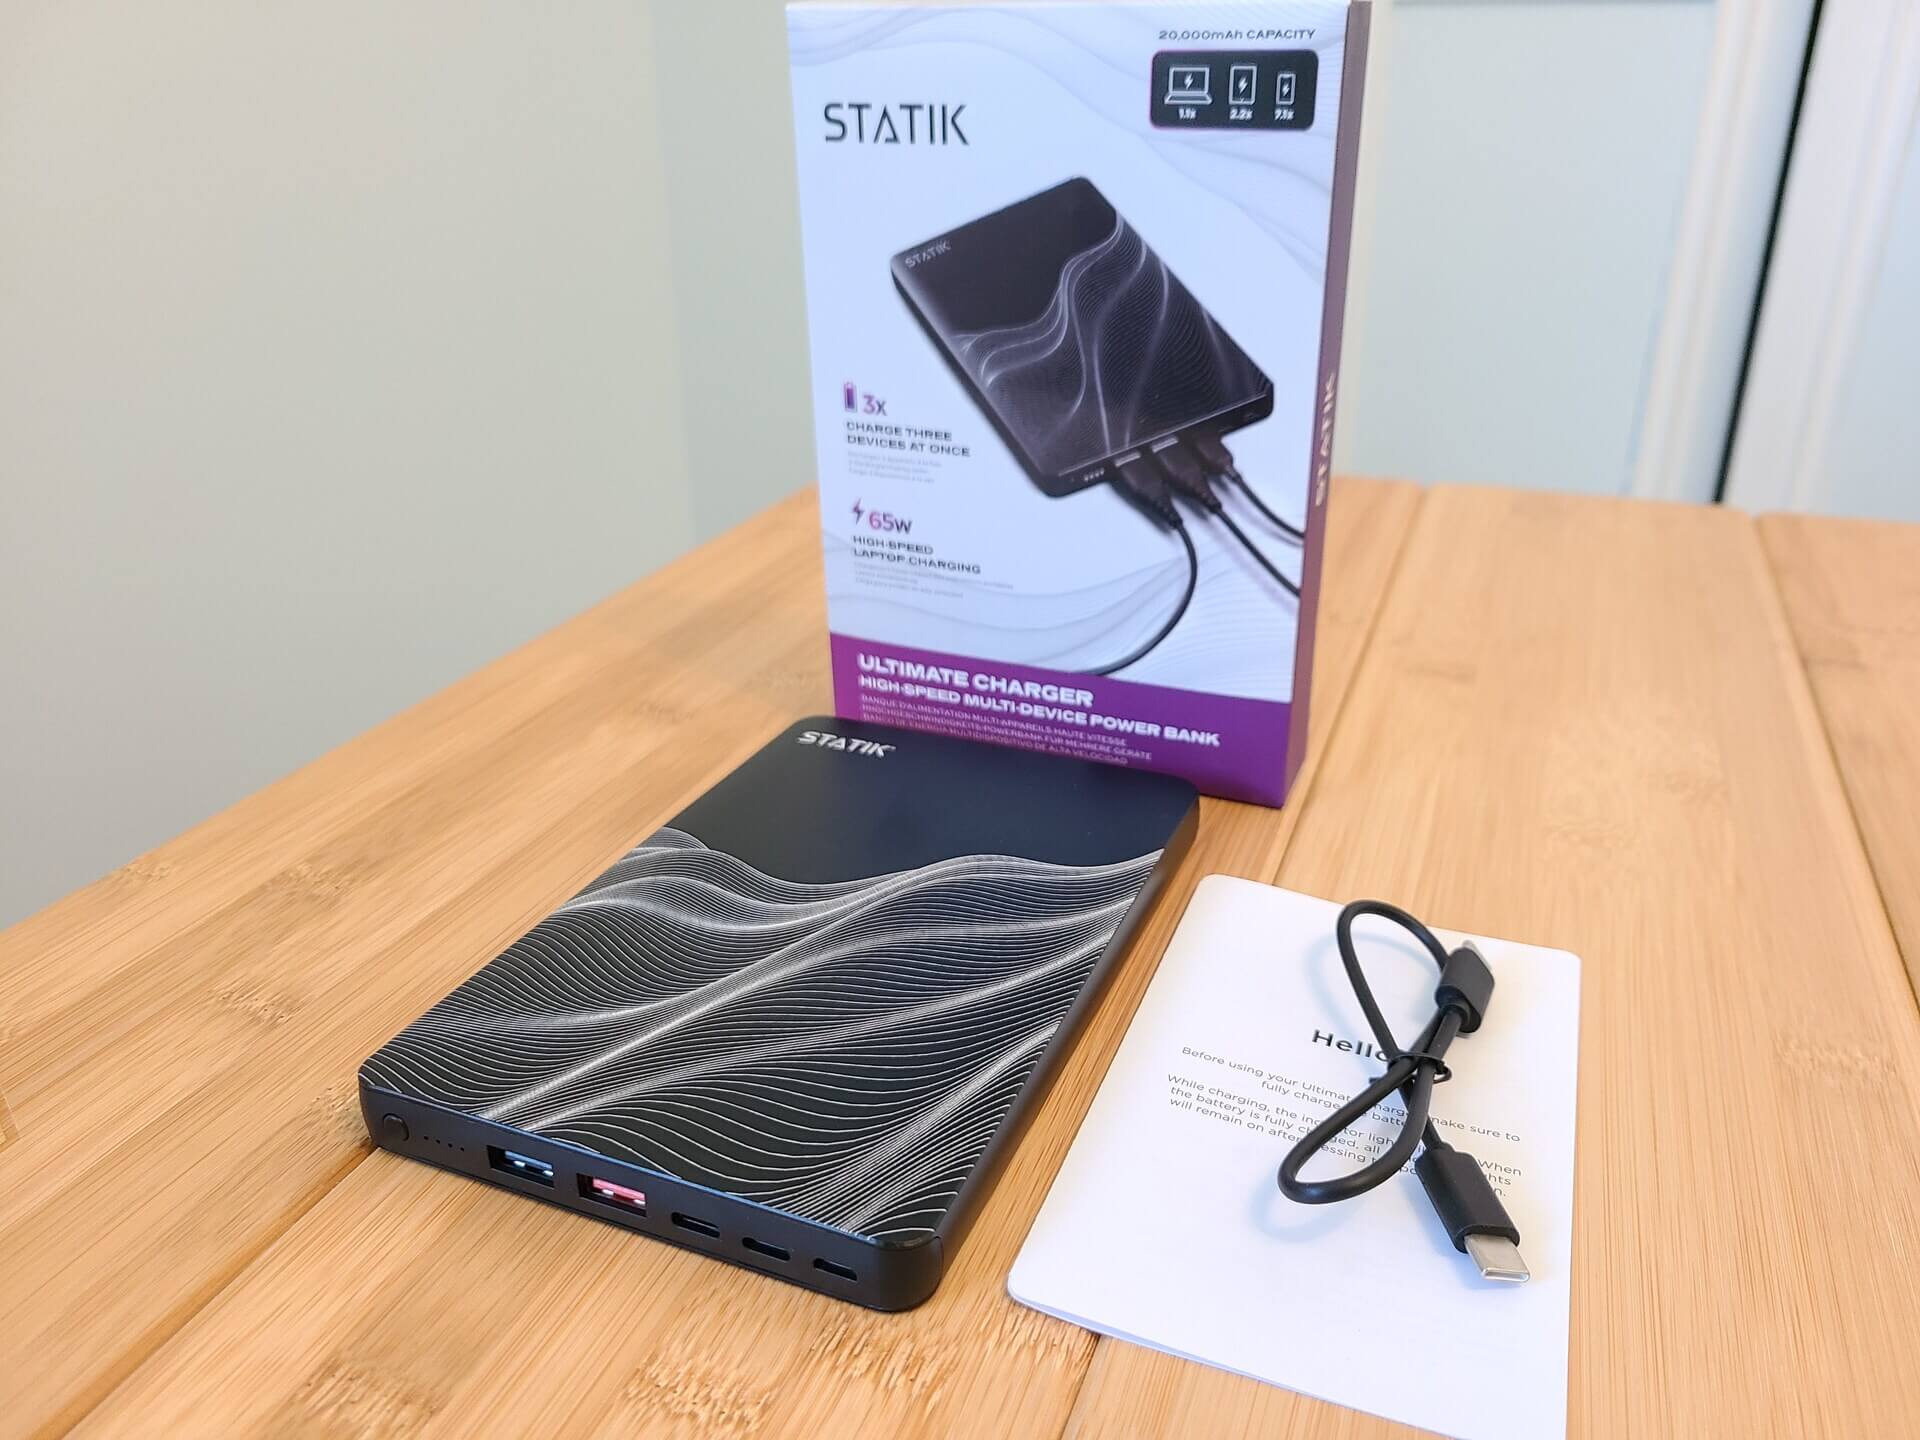  Statik 65W Laptop Power Bank 20000MAh, Fast Charging Powerful  & Slim, Charge 3 Devices at Once